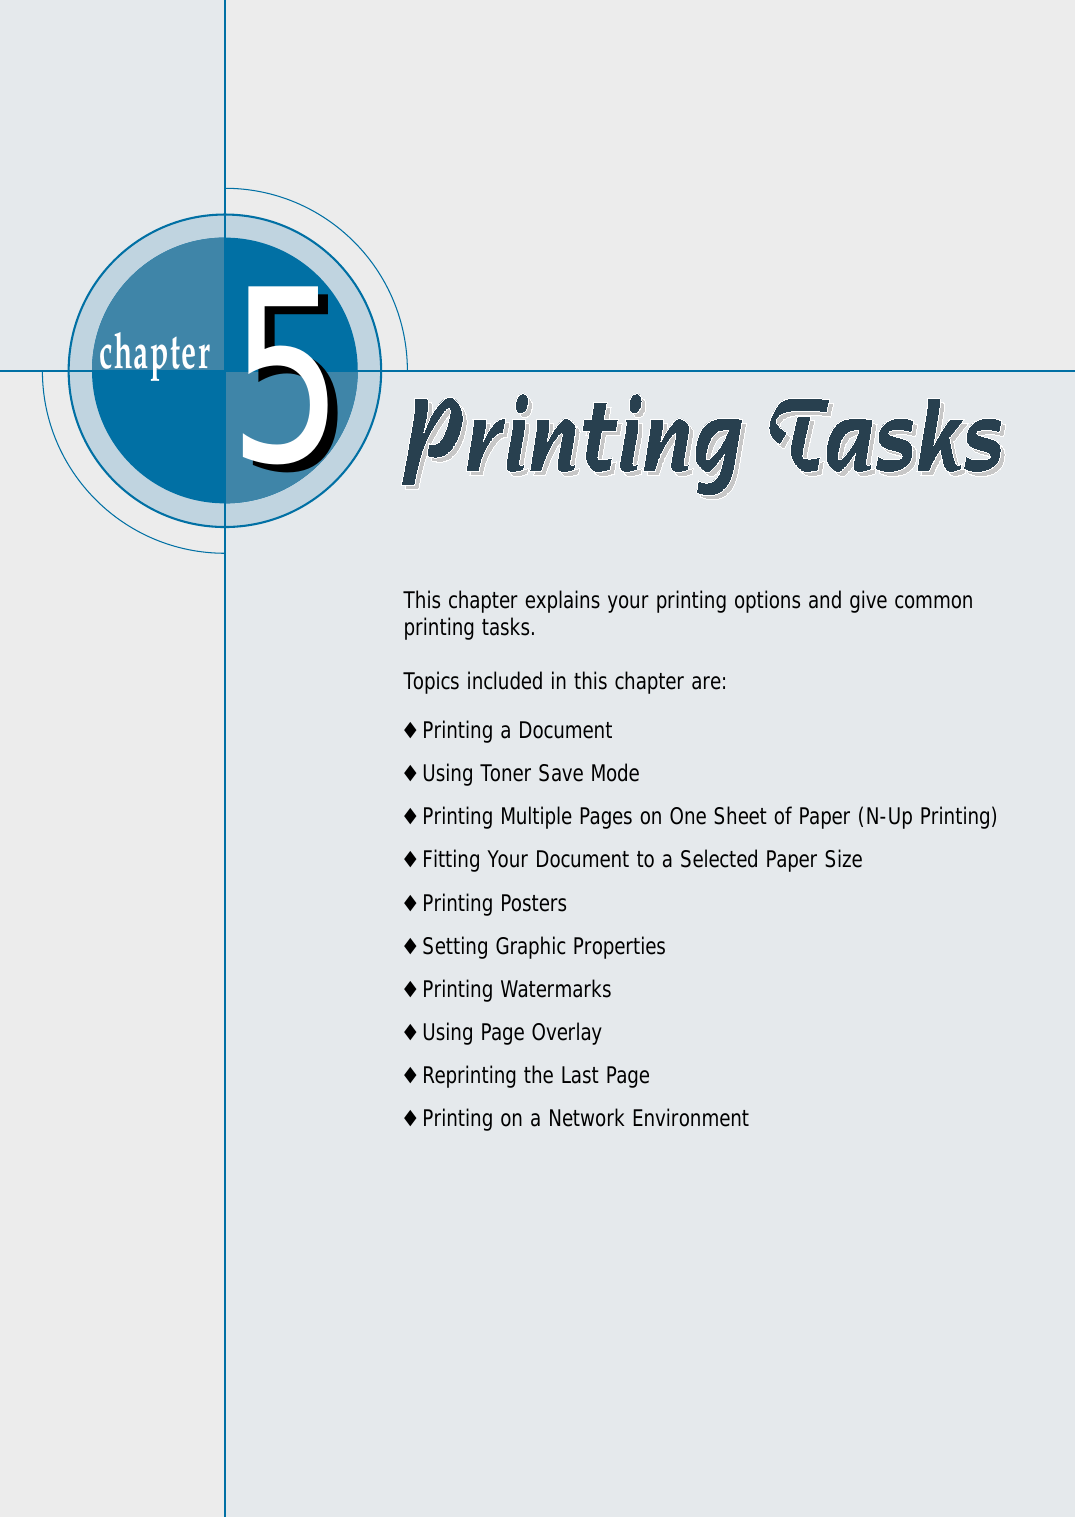 chapter  This chapter explains your printing options and give commonprinting tasks.Topics included in this chapter are:◆ Printing a Document◆ Using Toner Save Mode◆ Printing Multiple Pages on One Sheet of Paper (N-Up Printing)◆ Fitting Your Document to a Selected Paper Size◆ Printing Posters◆ Setting Graphic Properties◆ Printing Watermarks◆ Using Page Overlay◆ Reprinting the Last Page◆ Printing on a Network Environment55